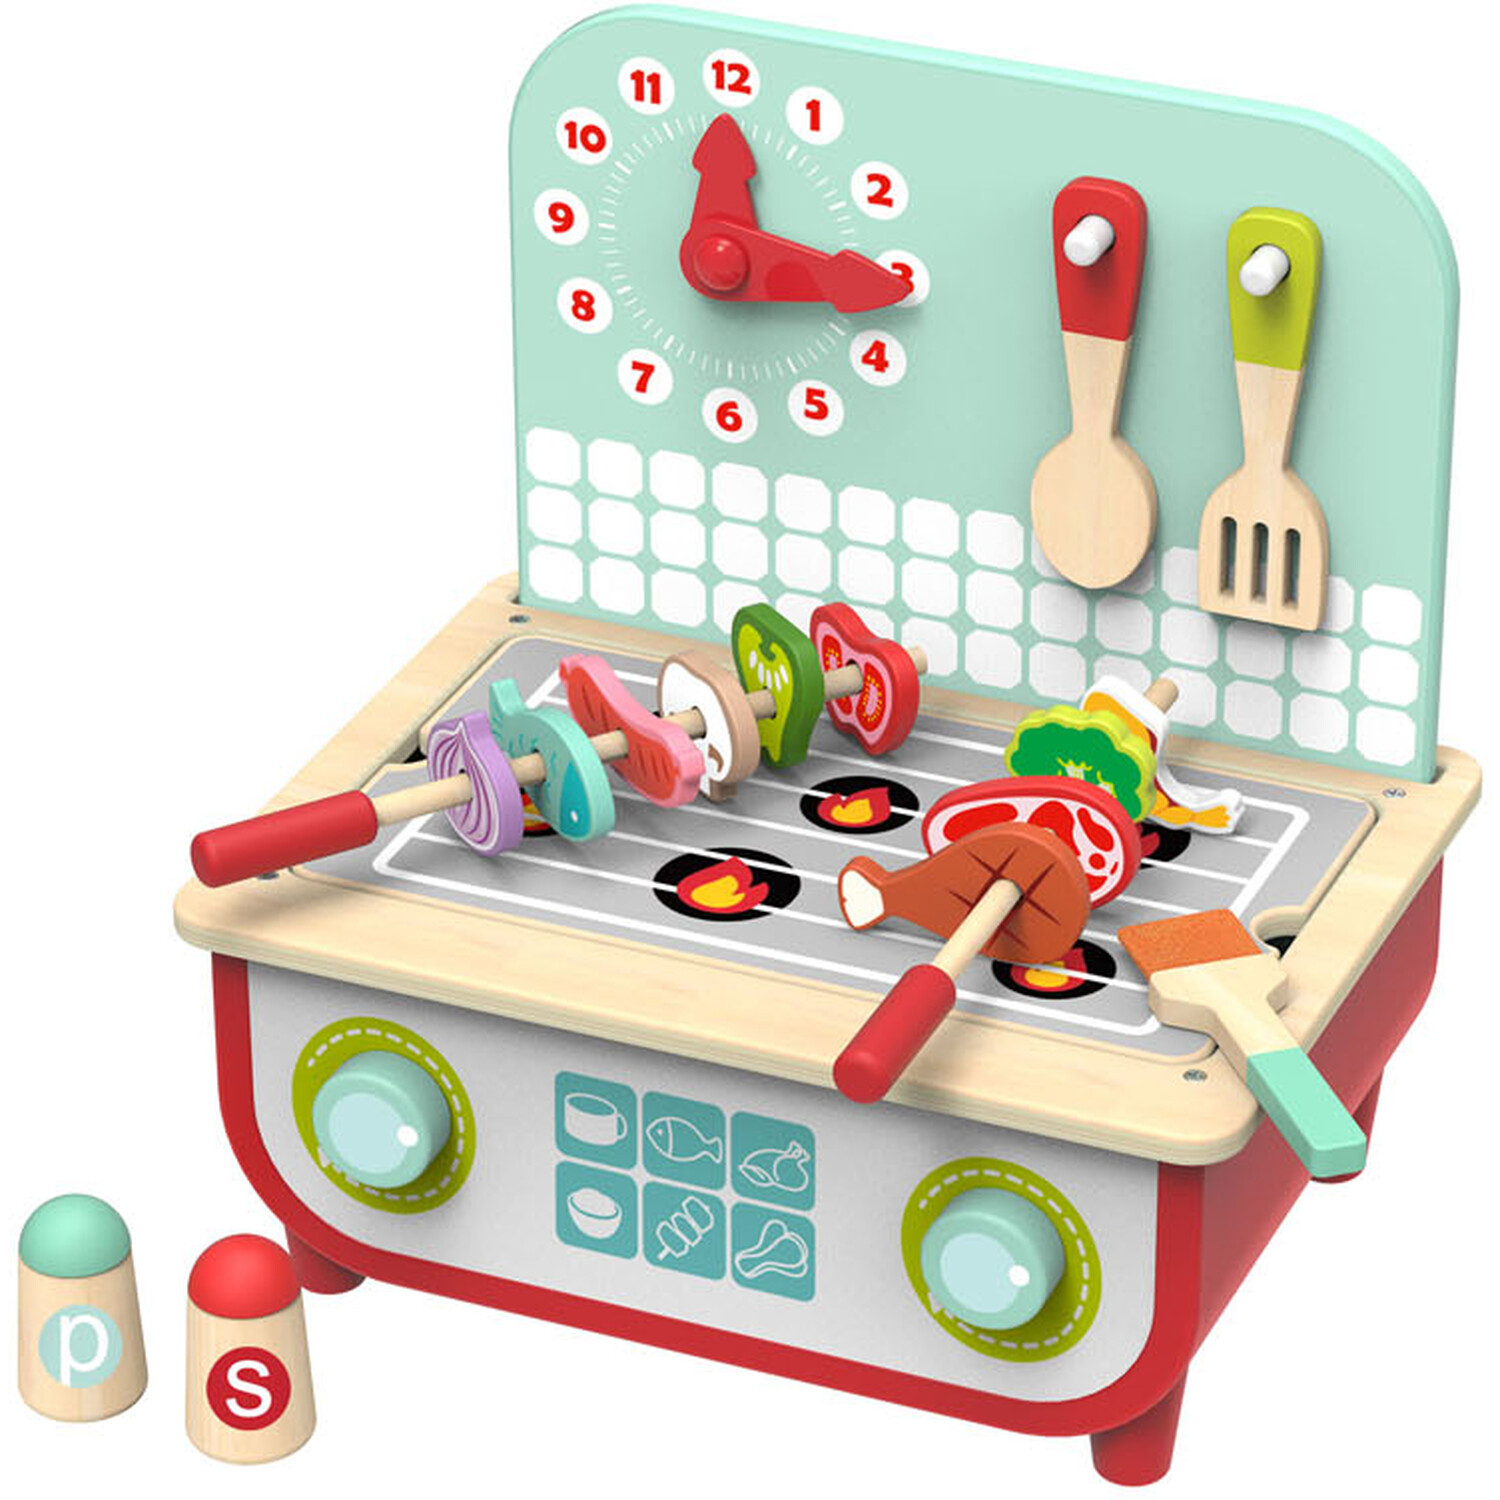 Imaginate Kitchen Set and BBQ Toy Image 1